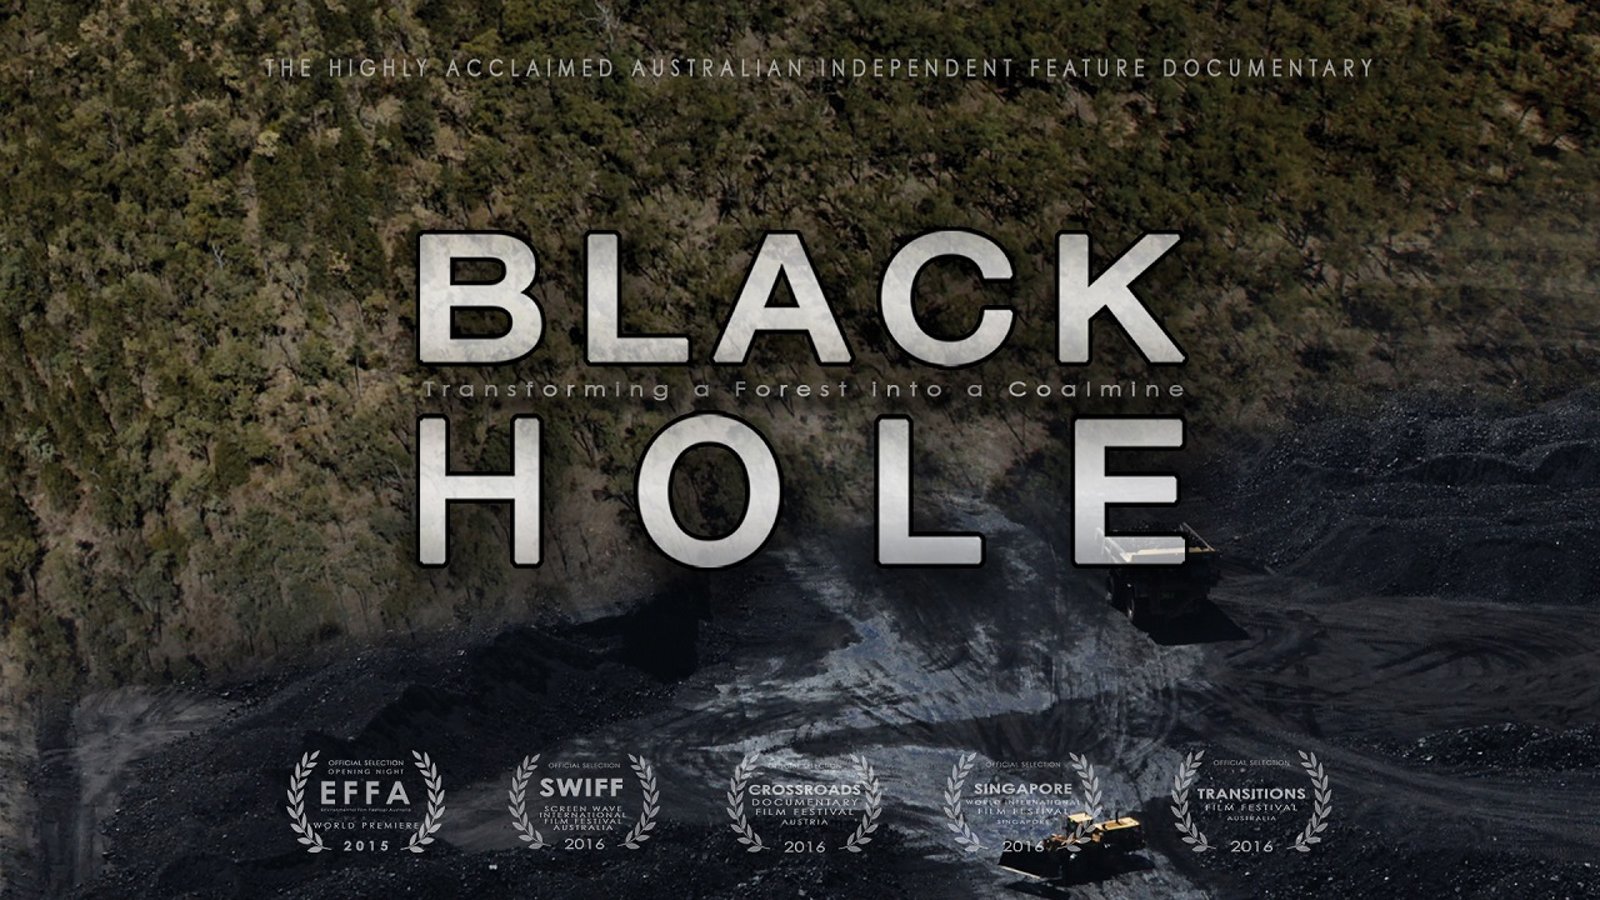 Black Hole - The Battle to Save an Endangered Forest in Australia